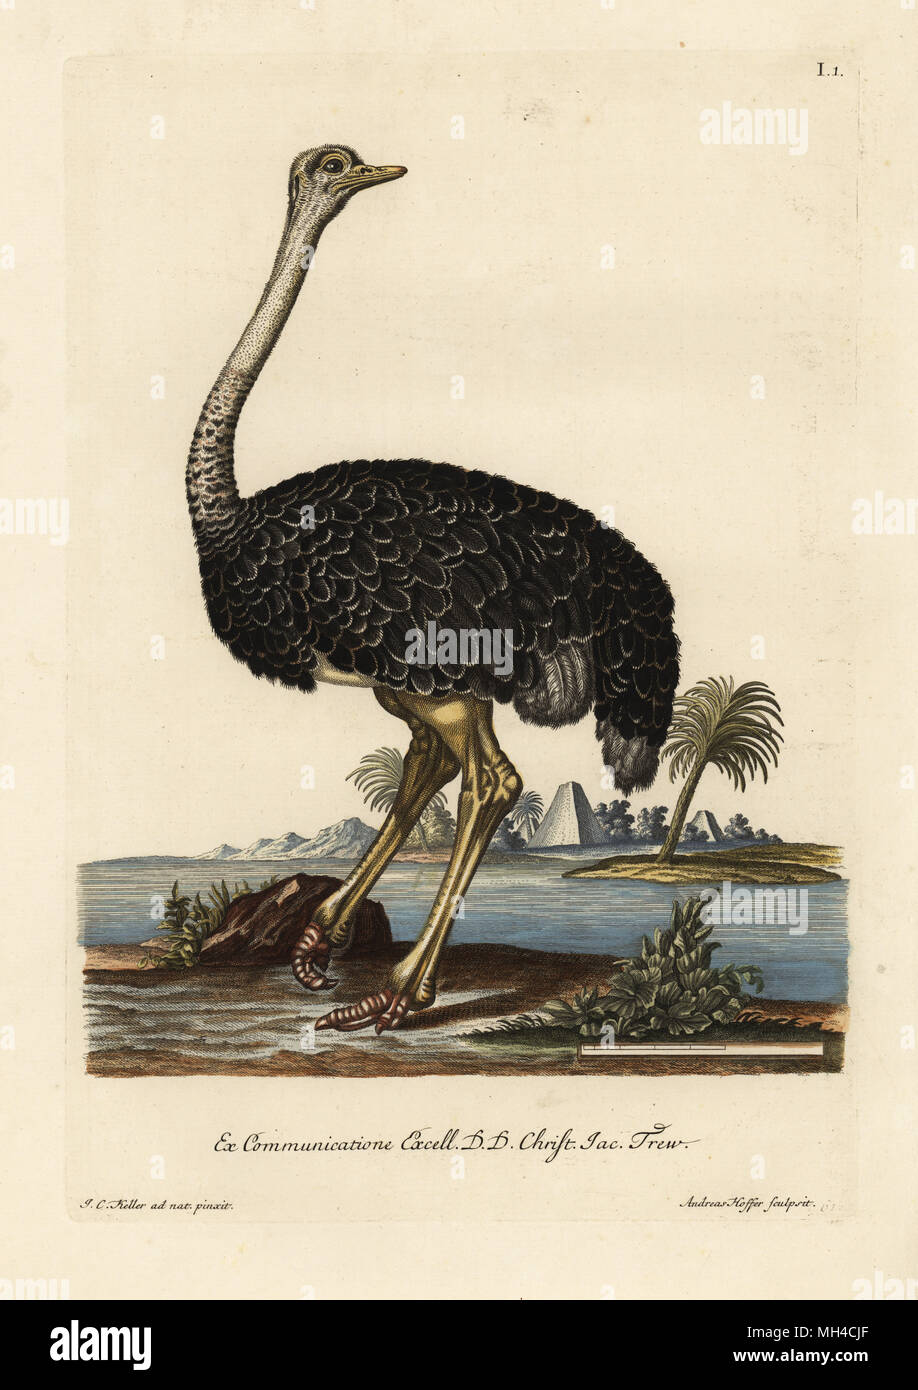 Ostrich, Struthio camelus. Handcoloured copperplate engraving by Andreas Hoffer after an illustration by Johann Christoph Keller from Georg Wolfgang Knorr's Deliciae Naturae Selectae of Kabinet van Zeldzaamheden der Natuur, Blusse and Son, Nuremberg, 1771. Specimens from a Wunderkammer or Cabinet of Curiosities owned by Dr. Christoph Jacob Trew in Nuremberg. Stock Photo